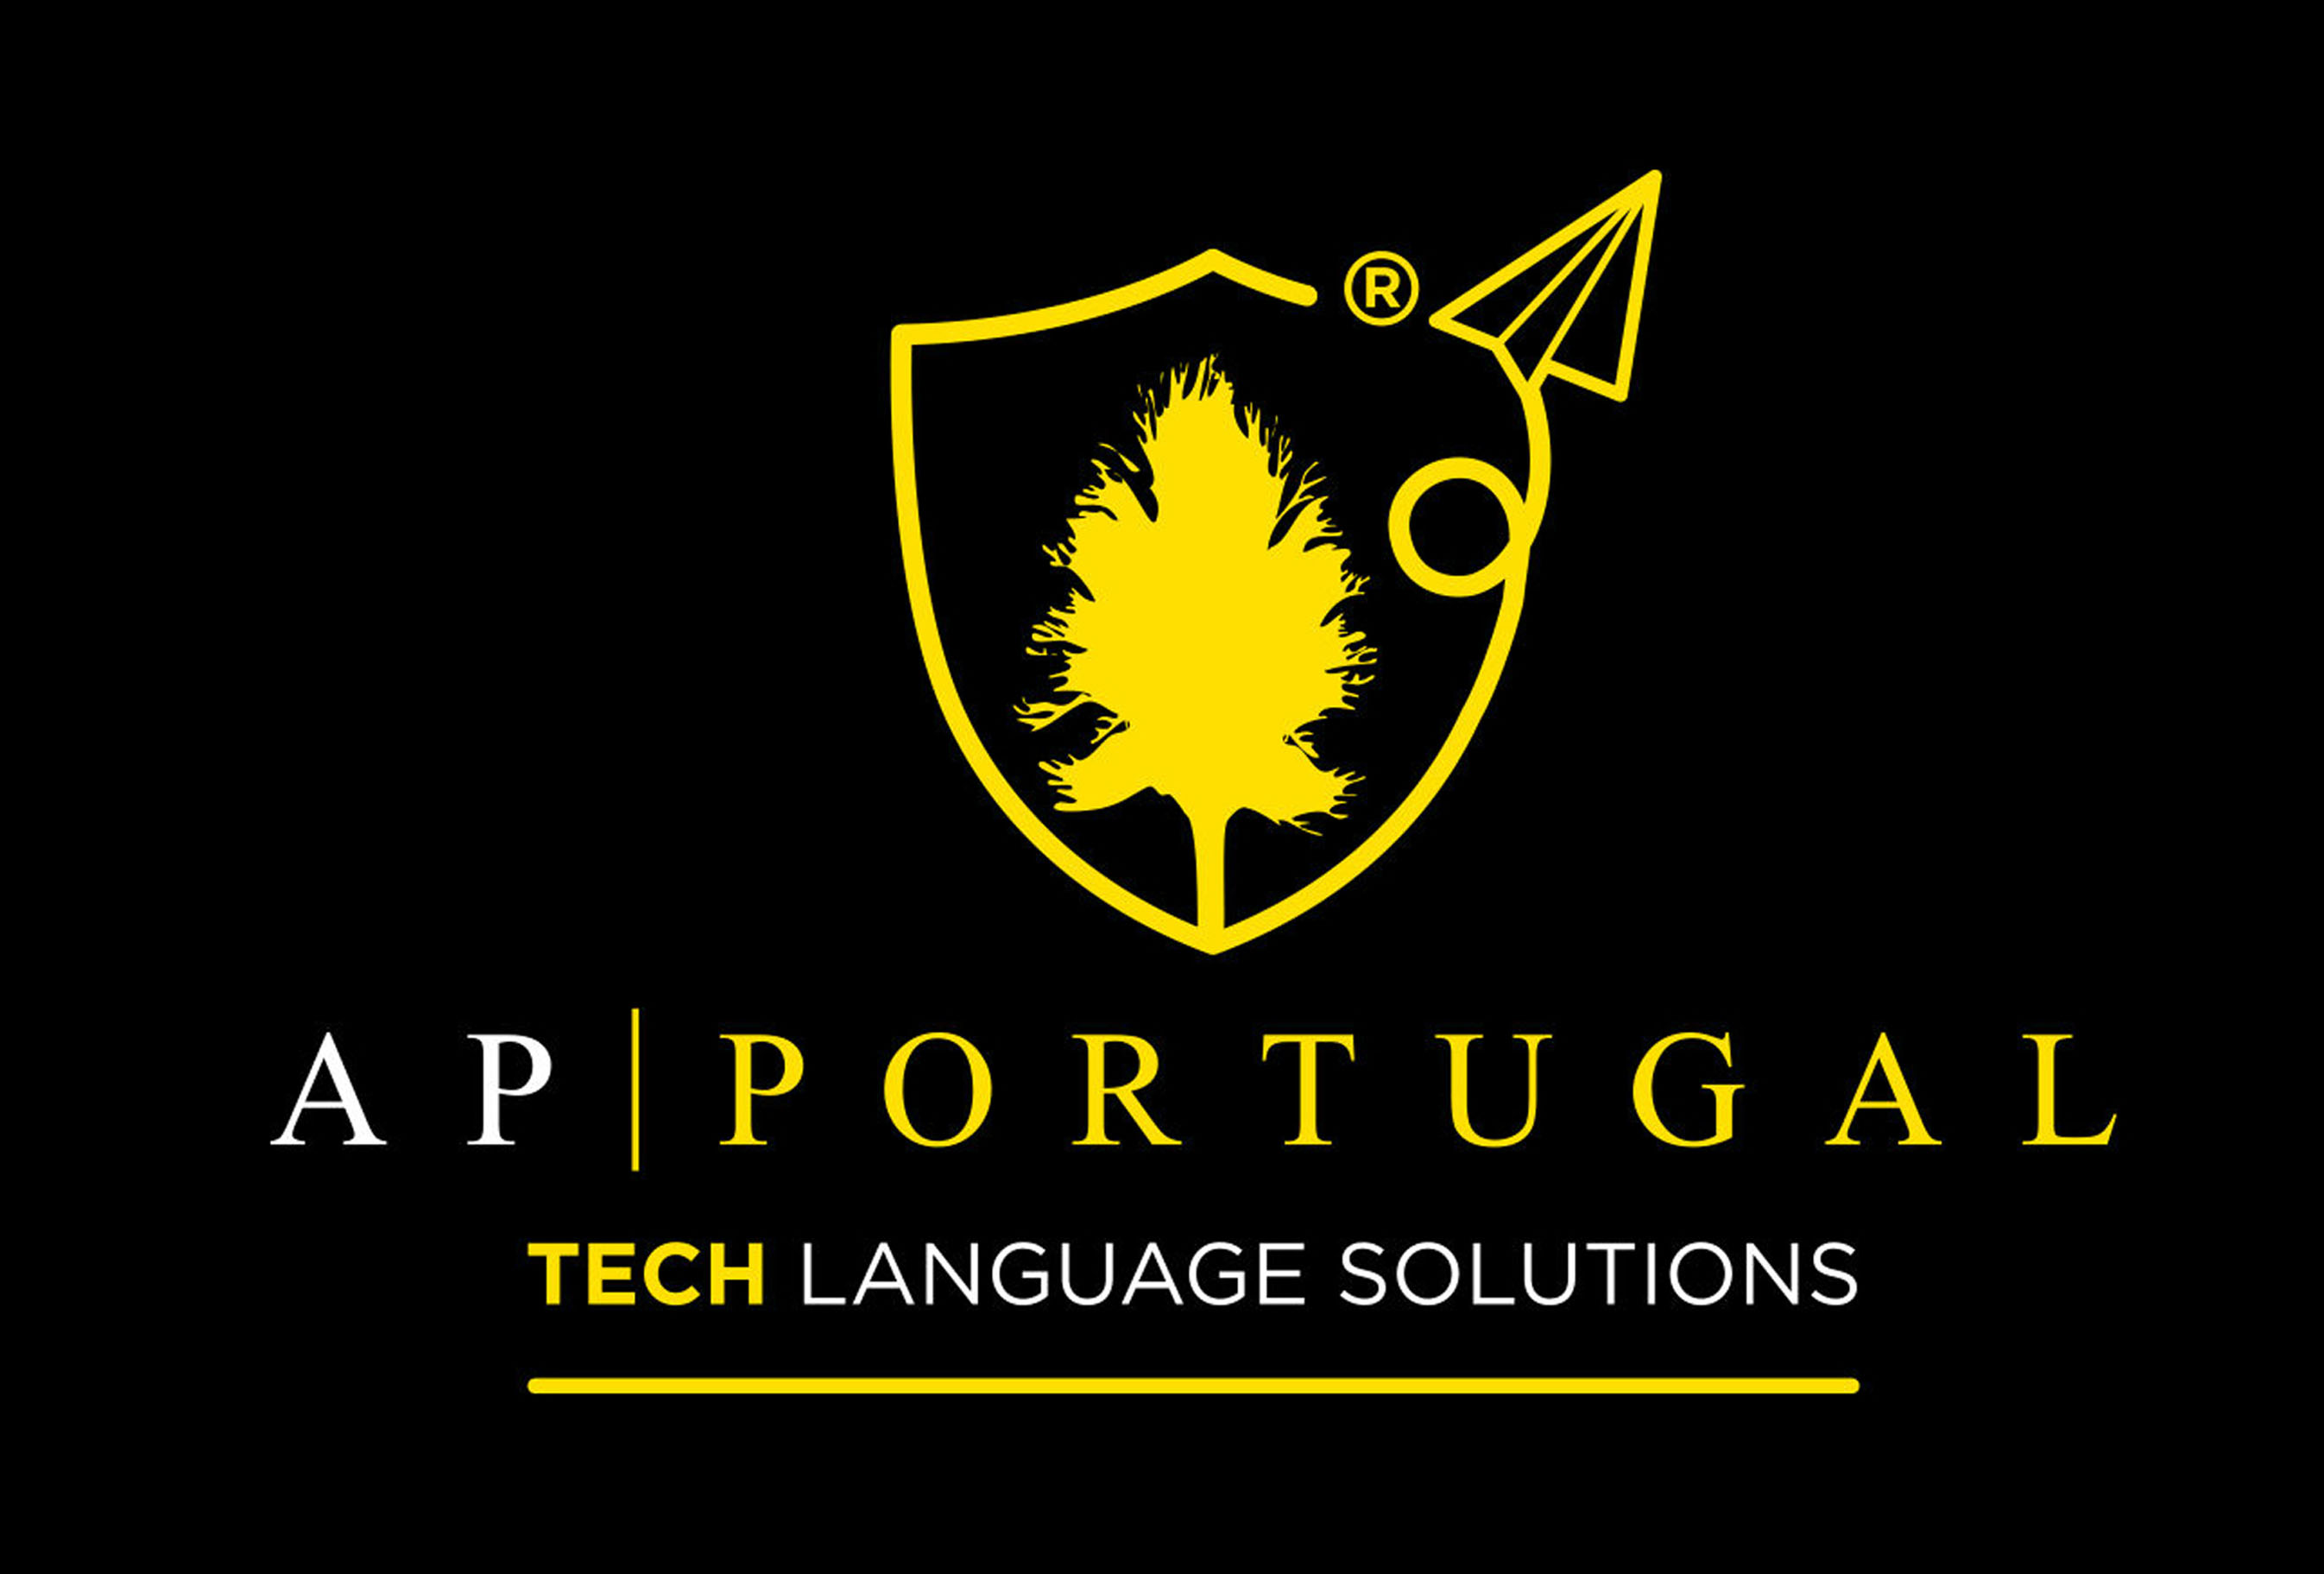 APPORTUGAL__Tech_Language_Solutions Logo